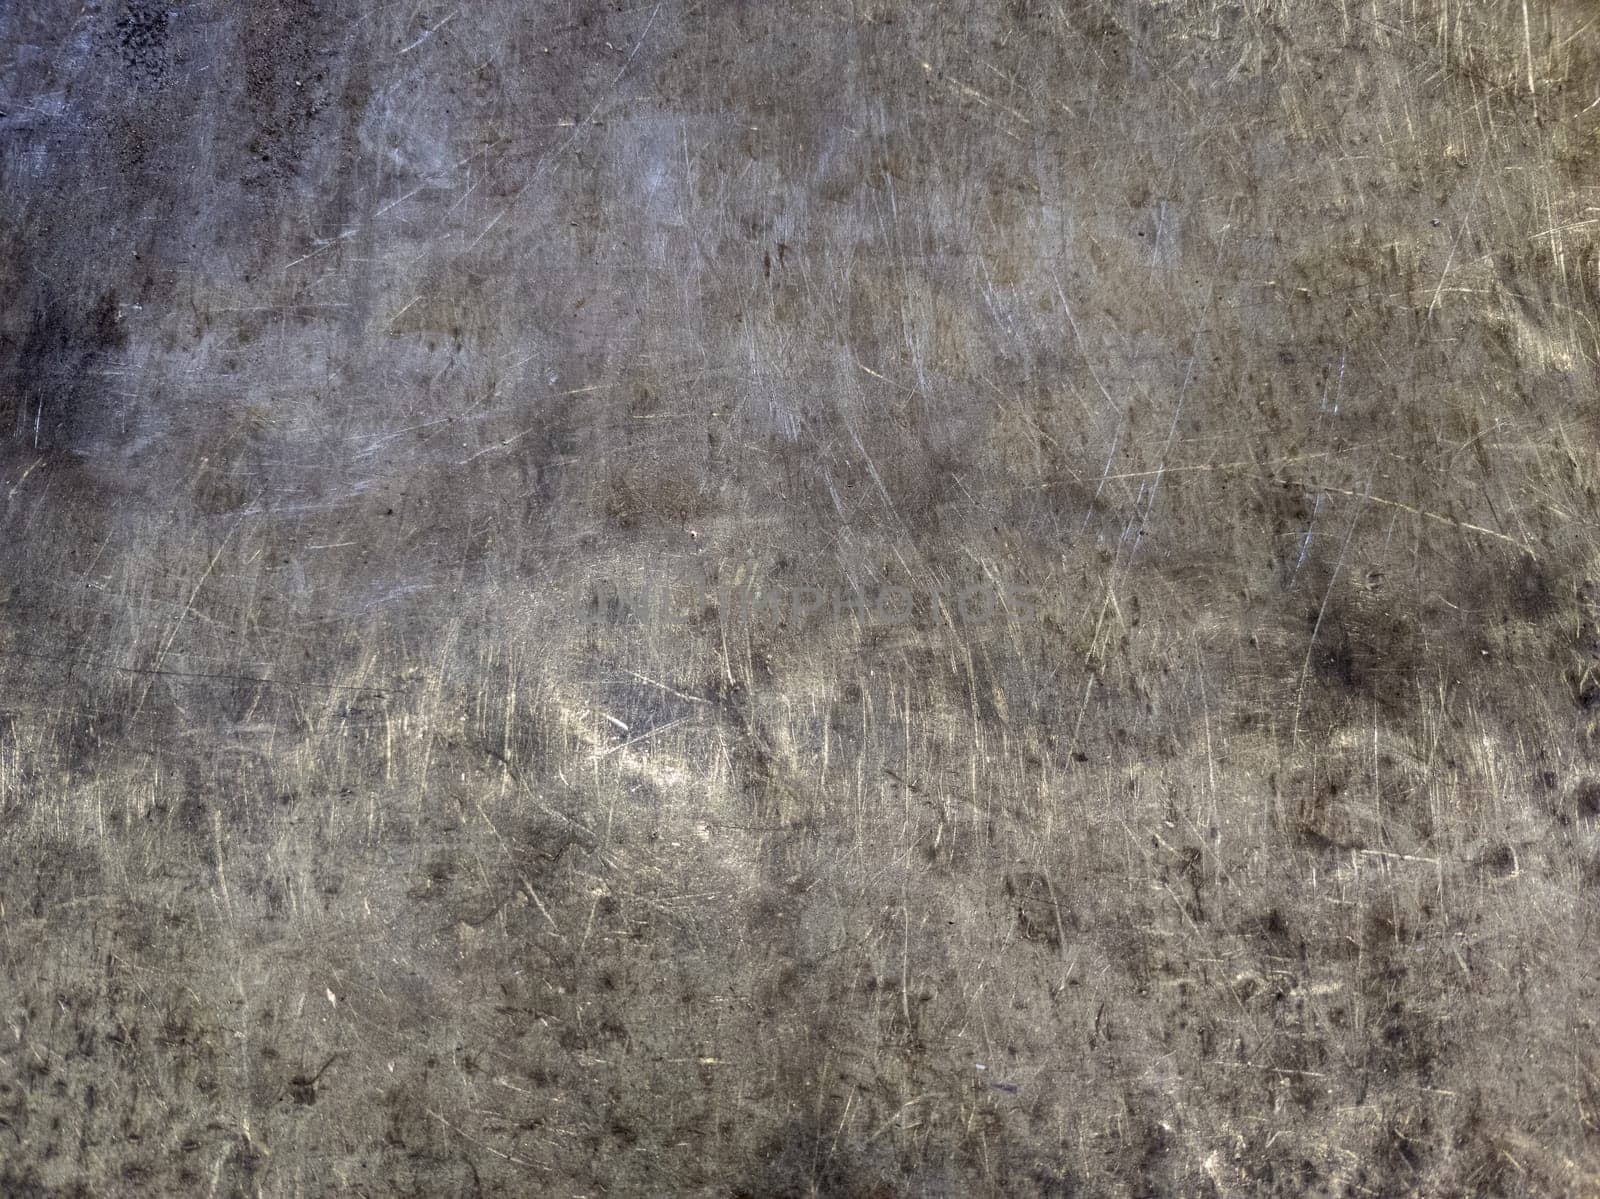 scratched beaten steel surface of workbench - texture and flat full-frame background by z1b